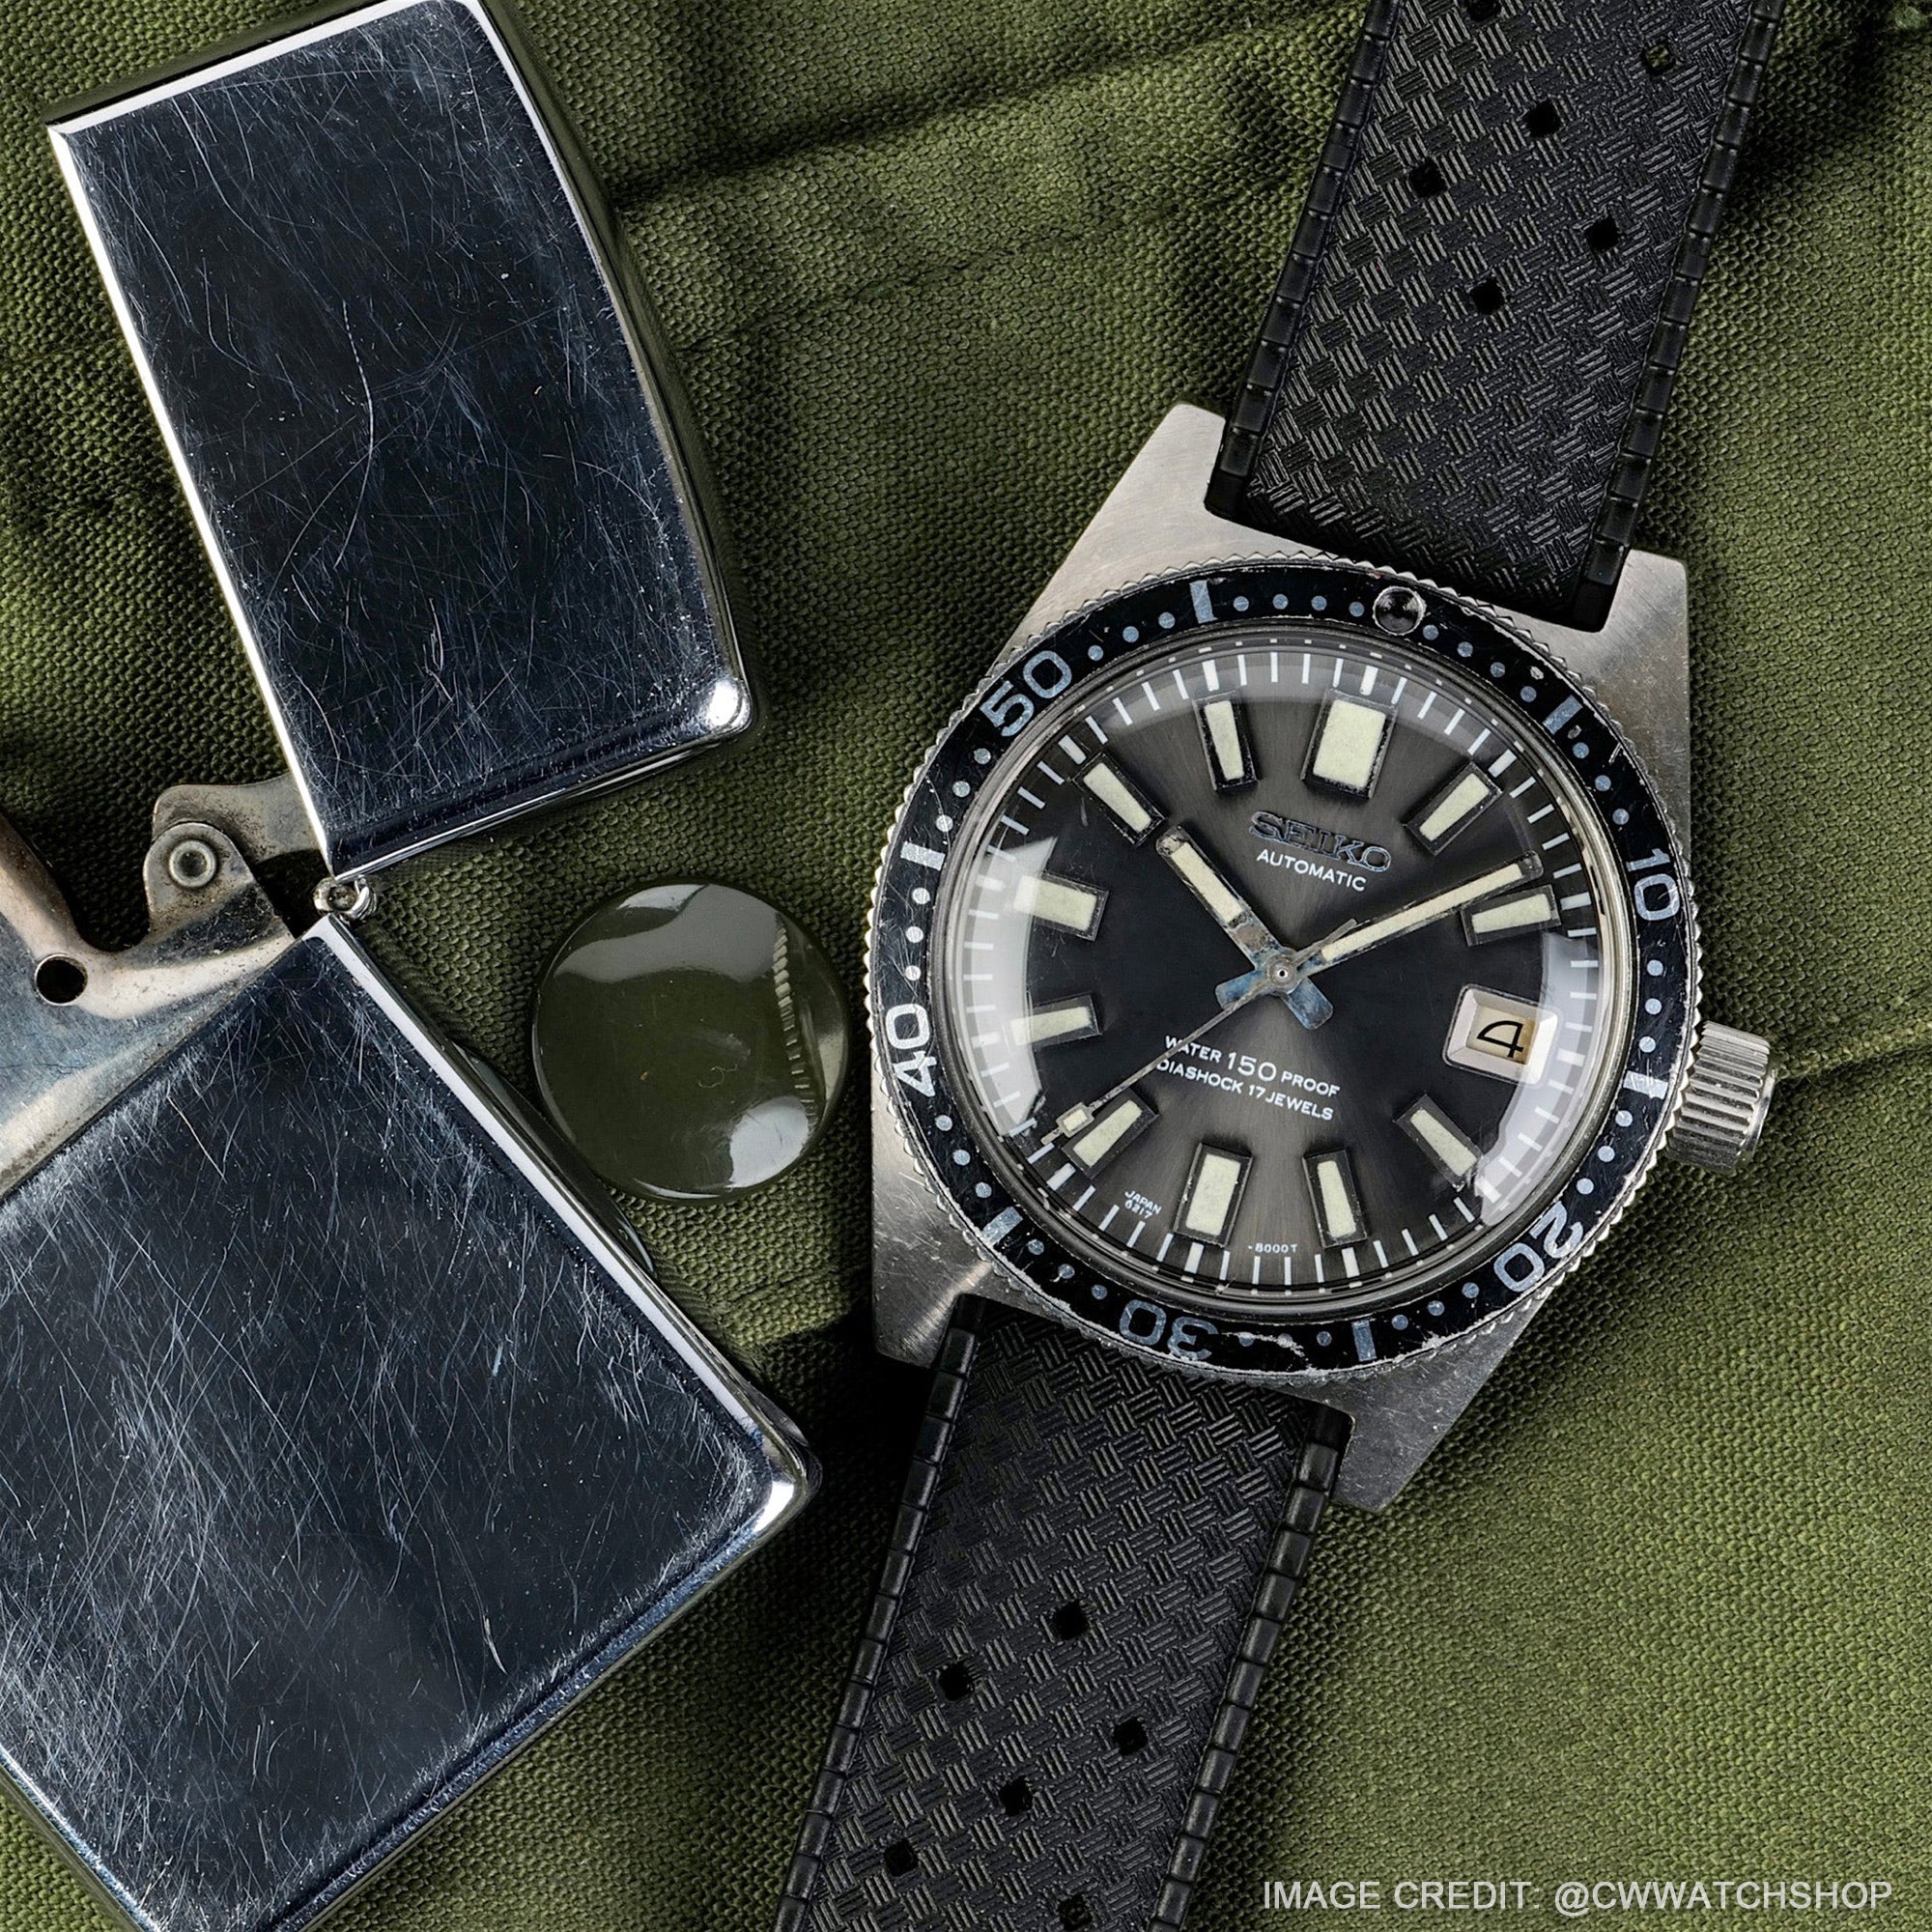 In 1965, Seiko launched its first Japanese diver's watch, the Seiko 62MAS, with luminous hands and hour markers for enhanced readability in low-light situations.